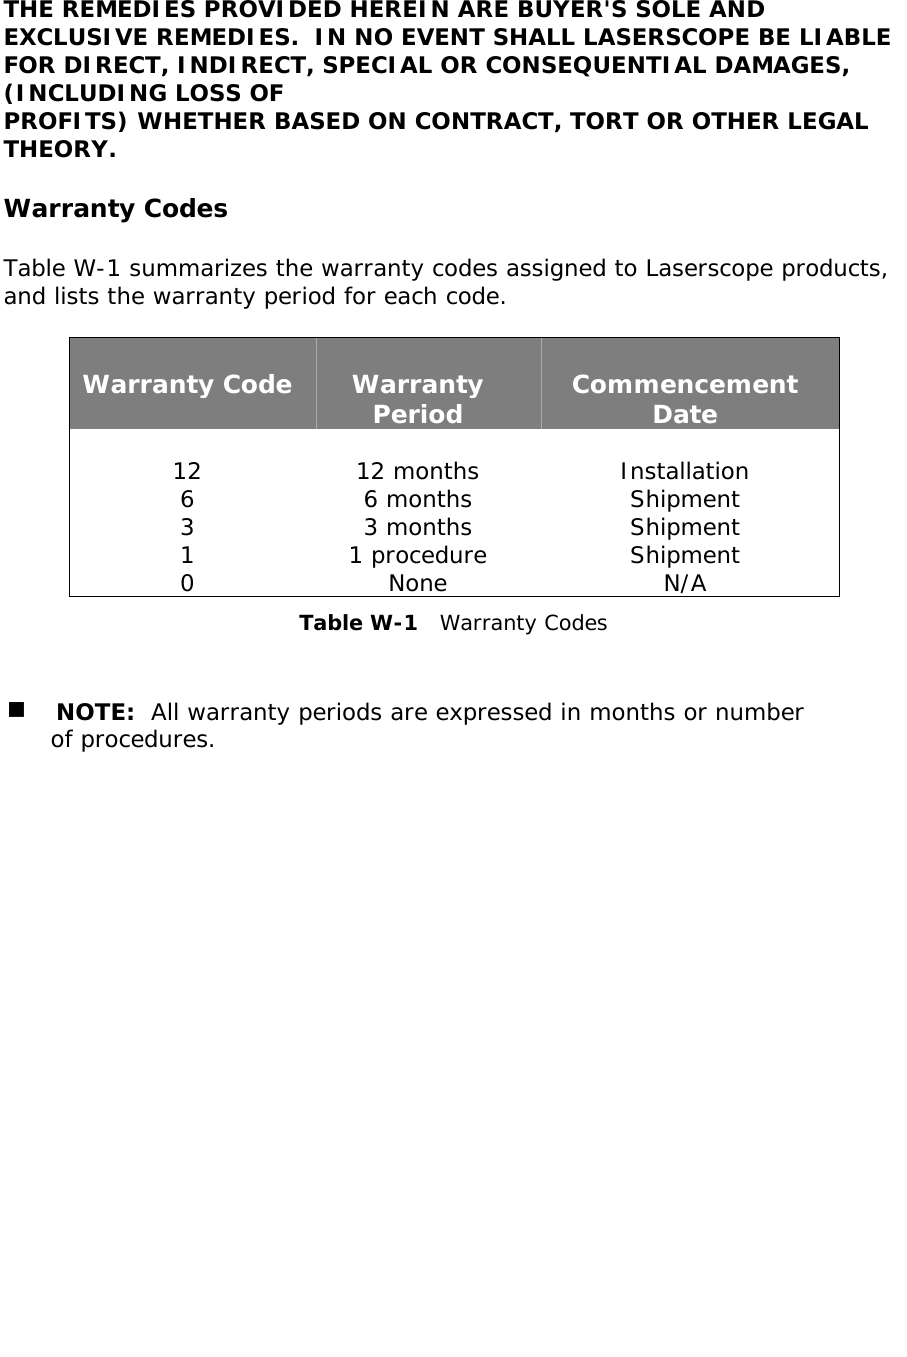   THE REMEDIES PROVIDED HEREIN ARE BUYER&apos;S SOLE AND EXCLUSIVE REMEDIES.  IN NO EVENT SHALL LASERSCOPE BE LIABLE FOR DIRECT, INDIRECT, SPECIAL OR CONSEQUENTIAL DAMAGES, (INCLUDING LOSS OF PROFITS) WHETHER BASED ON CONTRACT, TORT OR OTHER LEGAL THEORY.  Warranty Codes  Table W-1 summarizes the warranty codes assigned to Laserscope products, and lists the warranty period for each code.       Warranty Code  Warranty  Commencement  Period  Date      12  12 months  Installation 6 6 months Shipment 3 3 months Shipment 1 1 procedure Shipment 0 None  N/A Table W-1   Warranty Codes    NOTE:  All warranty periods are expressed in months or number        of procedures.    Warranty          32                        